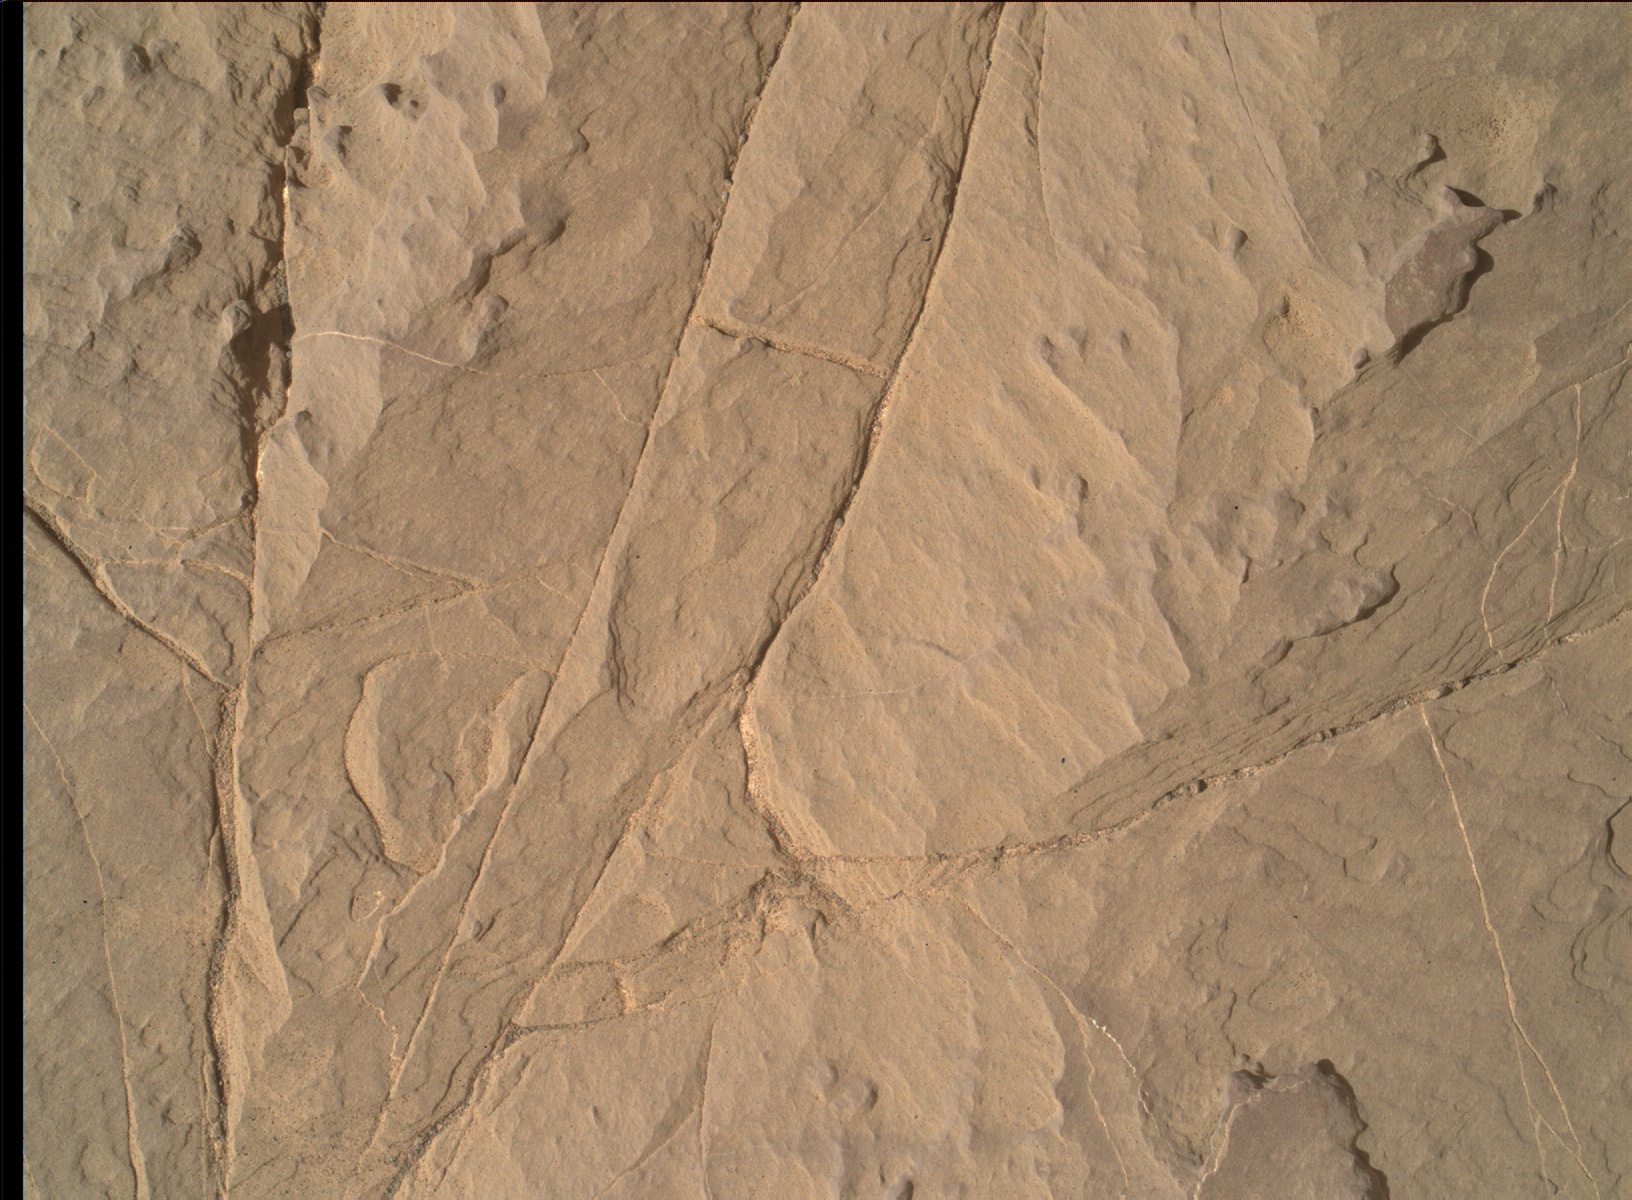 Nasa's Mars rover Curiosity acquired this image using its Mars Hand Lens Imager (MAHLI) on Sol 2000